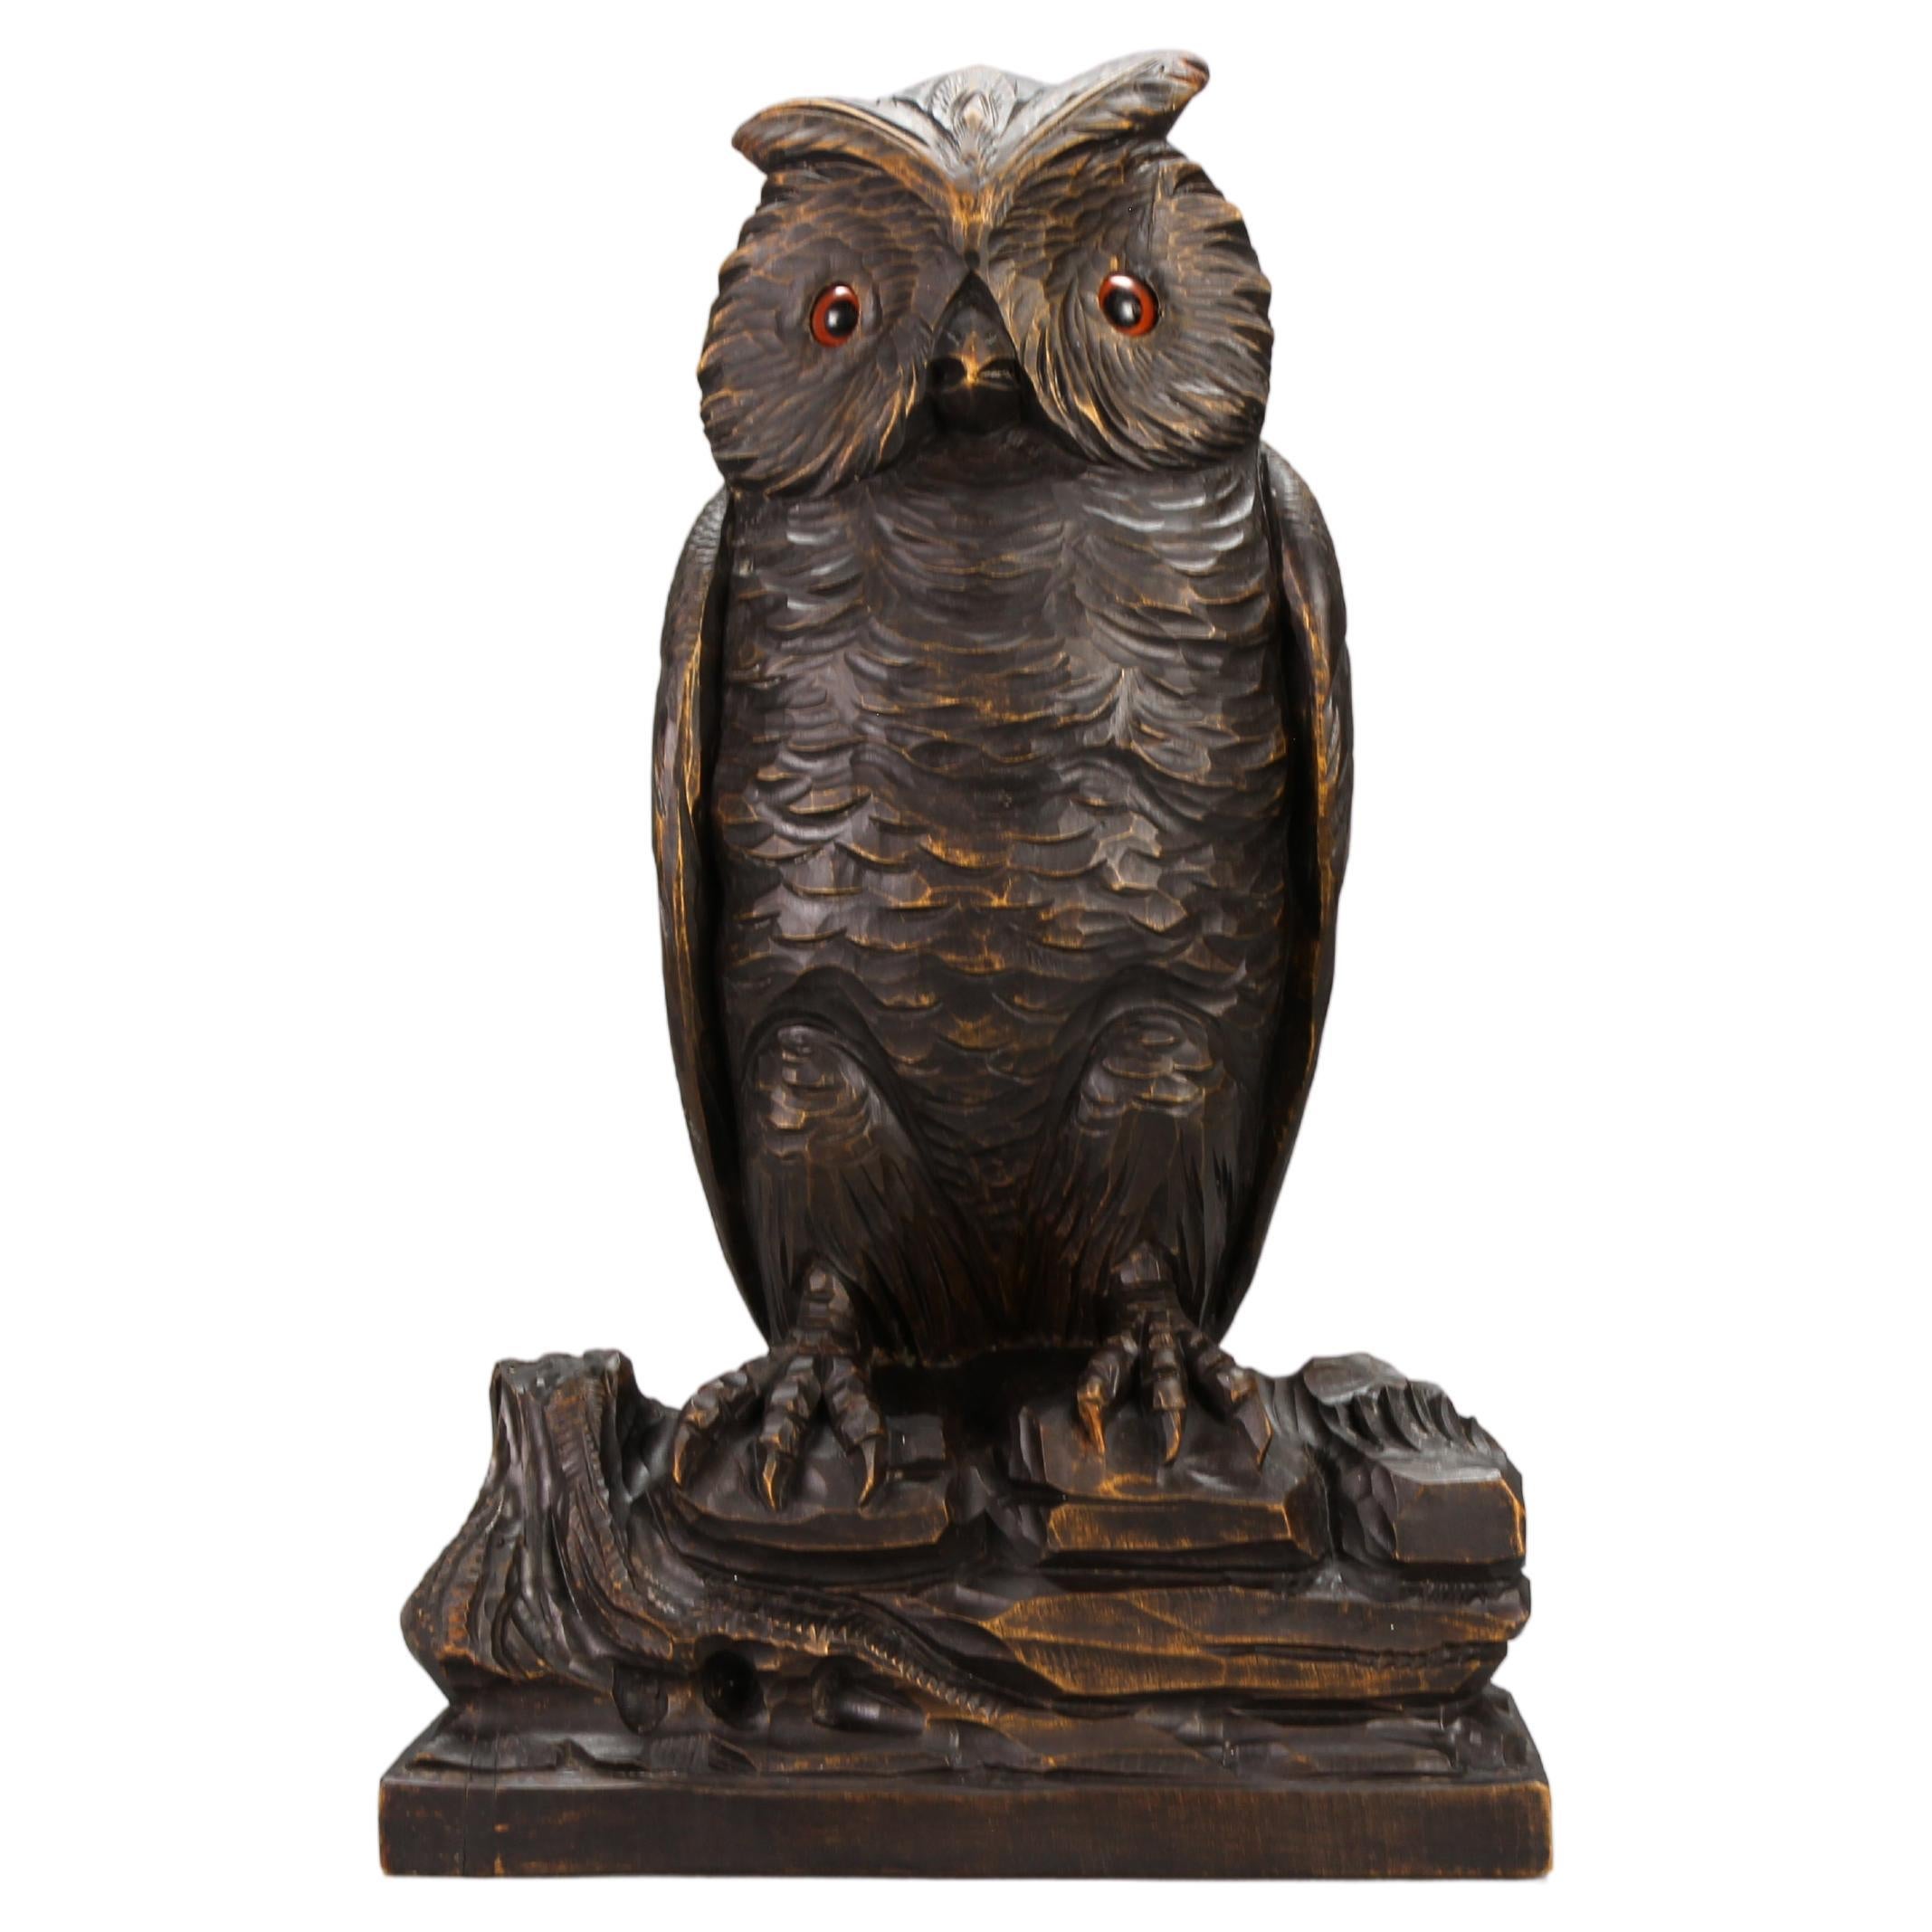 Antique German Black Forest Style Carved Owl Sculpture with Glass Eyes, ca. 1920